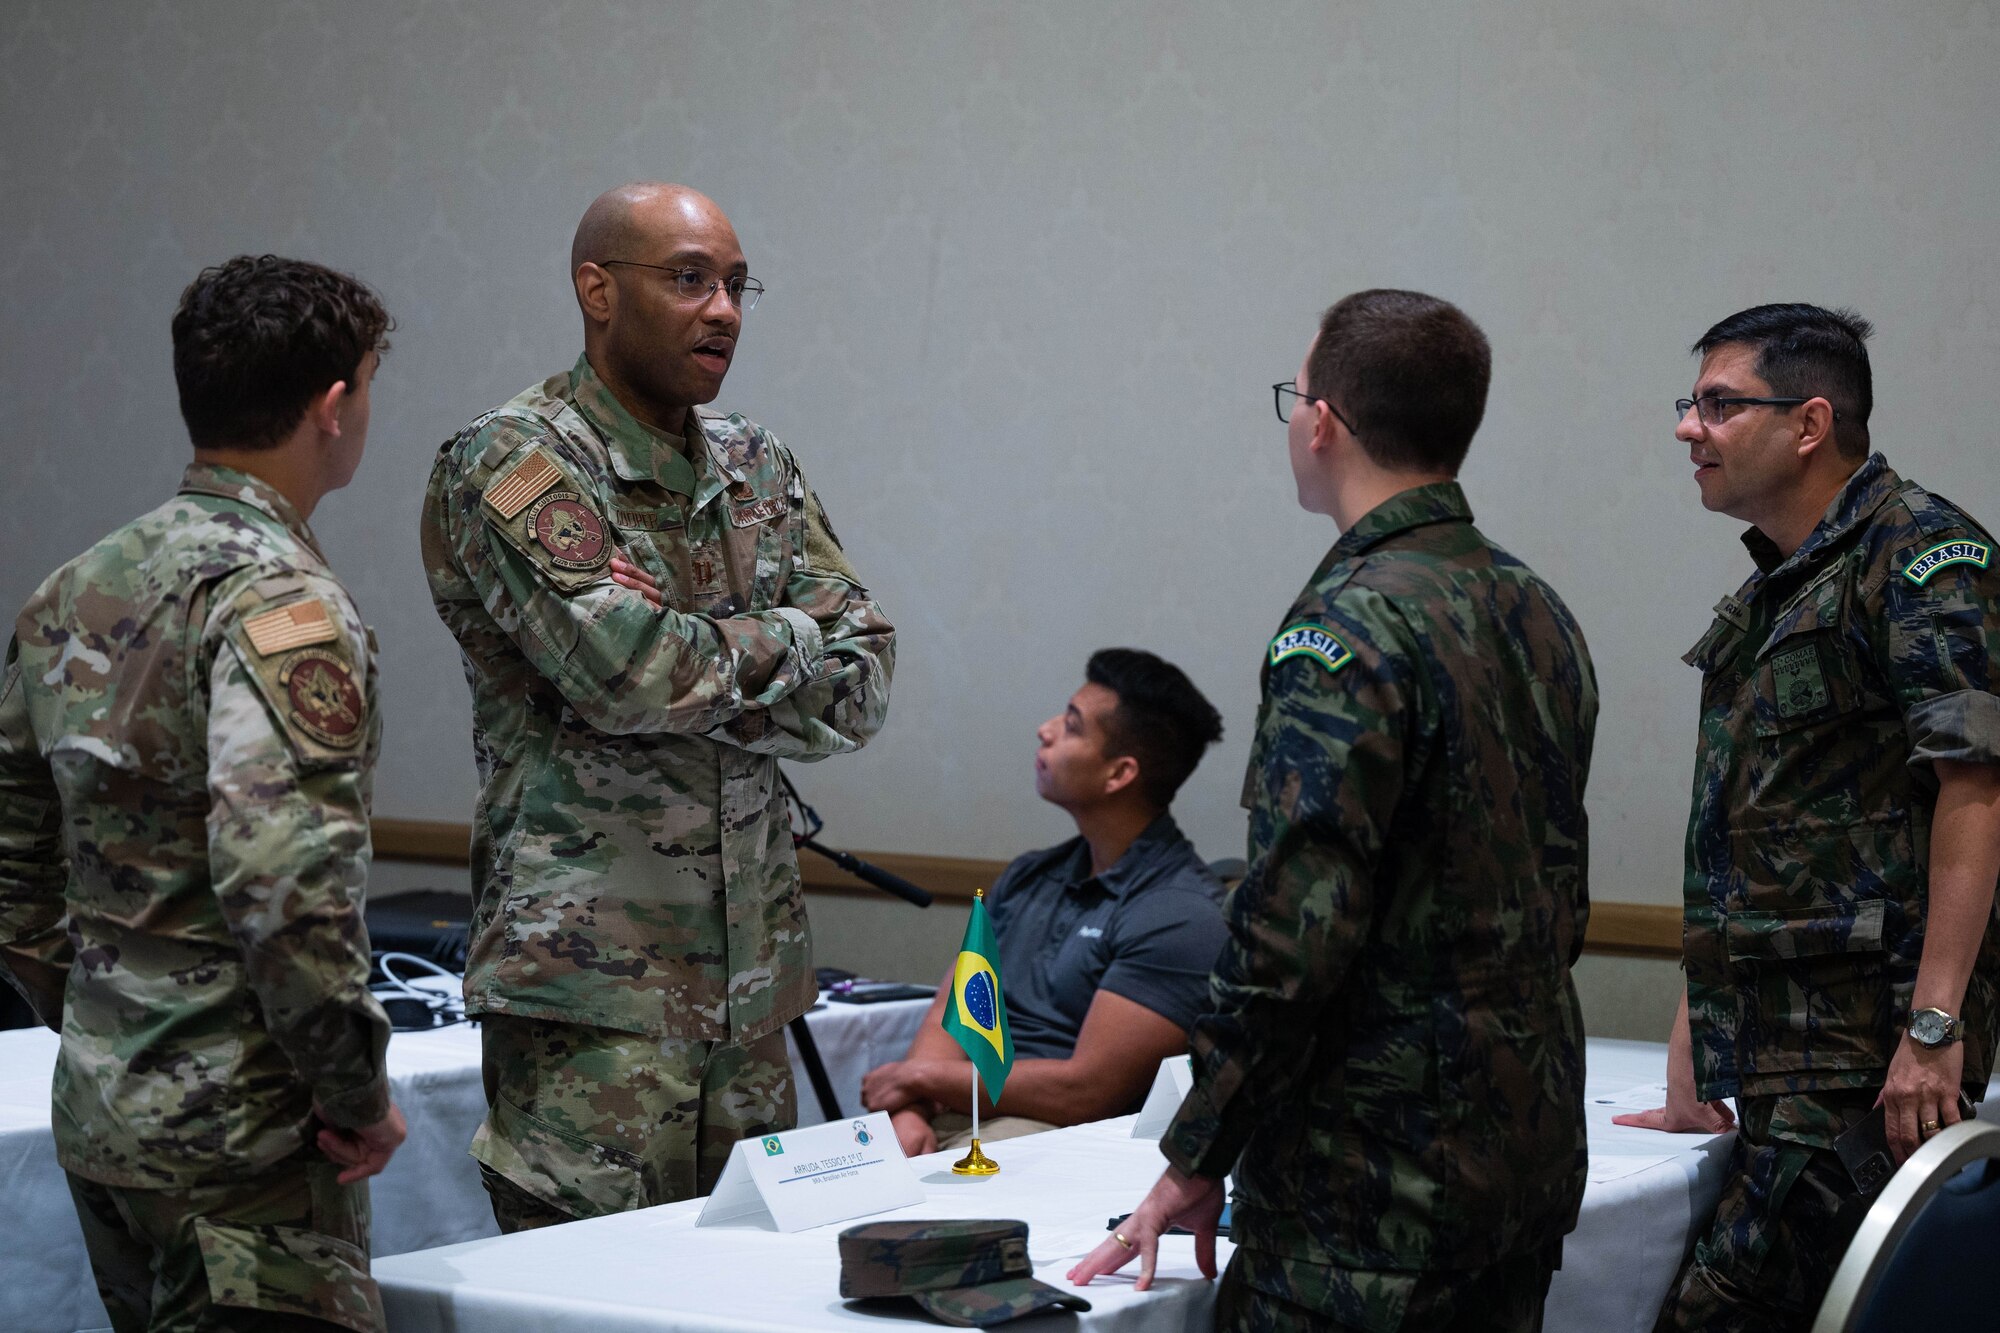 U. S. Air Force and Brazilian Air Force members discuss with one another while participating in the Global Sentinel 2024 Mid-Planning Conference at Vandenberg Space Force Base, Calif., June 29, 2023. Global Sentinel is USSPACECOM’s single largest multinational event and leading security cooperation effort designed to strengthen partnerships with other space-faring nations, improve operational collaboration, and promote responsible behavior in the space domain. (U.S. Space Force photo by Tech. Sgt. Luke Kitterman)